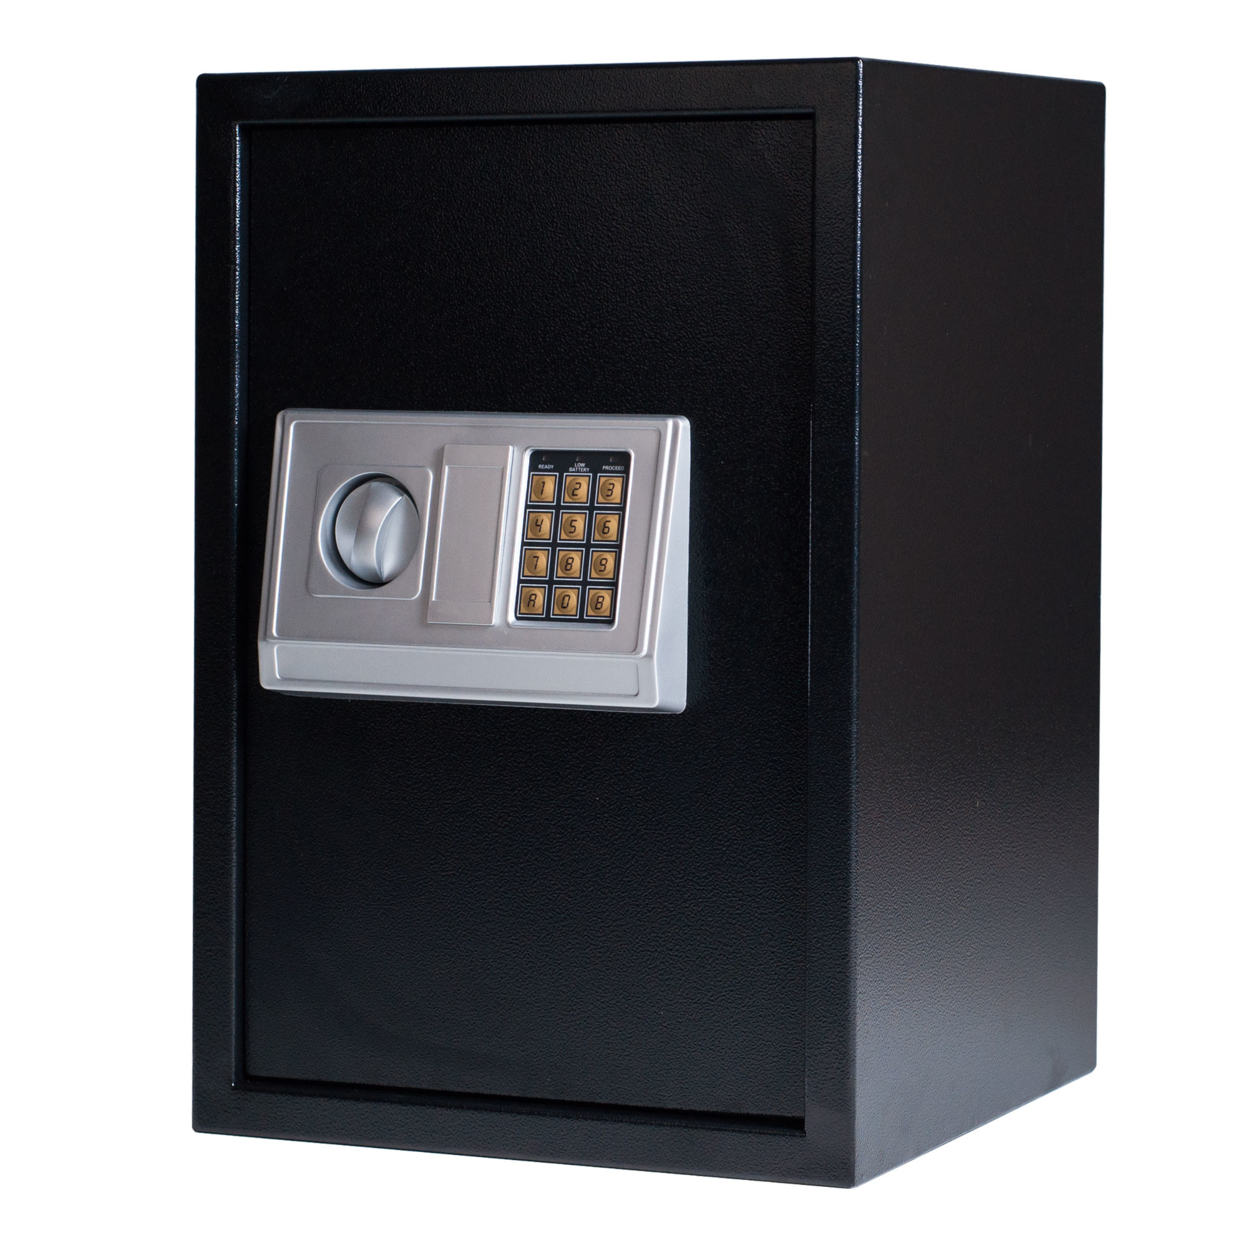 Extra Large Black Professional Electronic Digital Safe 19 X 13 X 12 And 38 Lbs